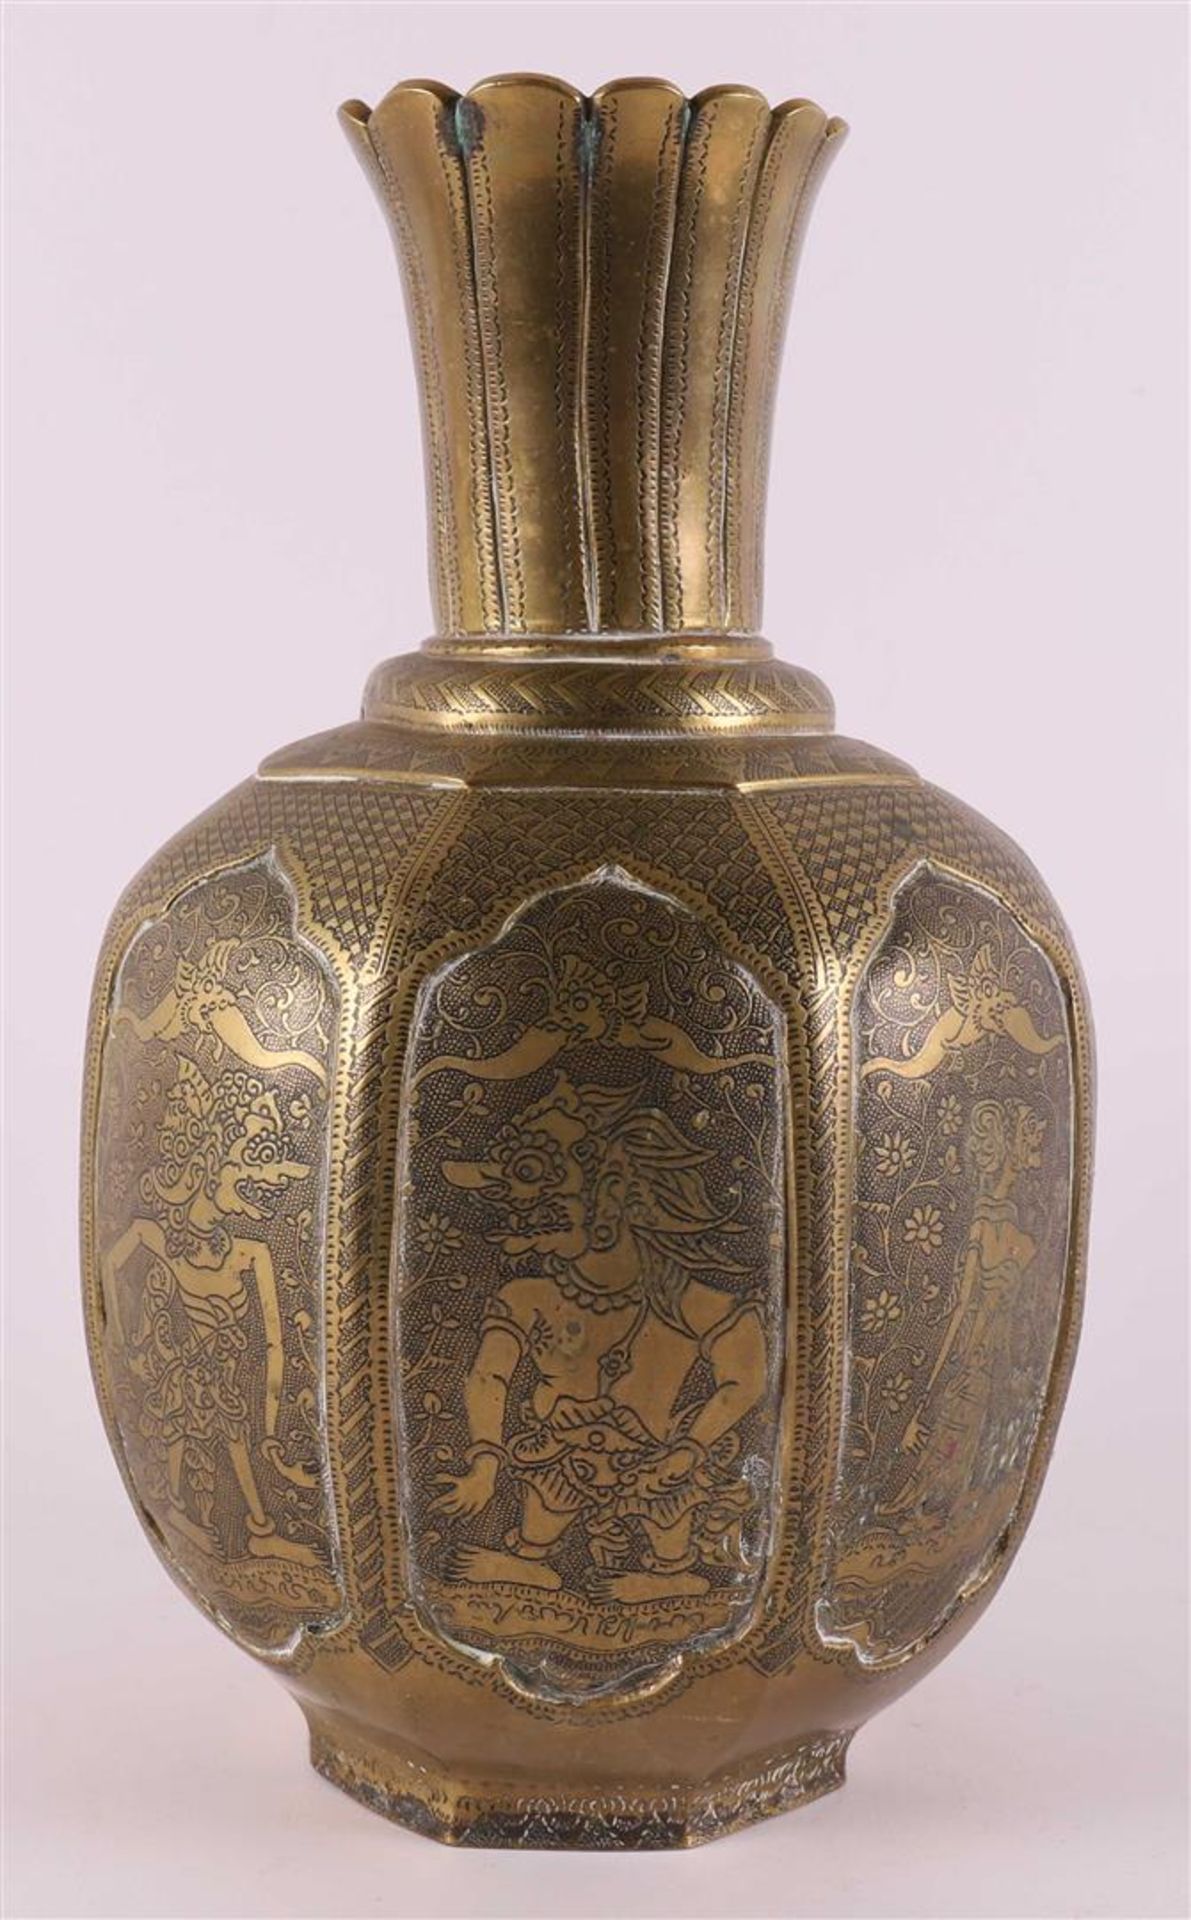 A brass baluster-shaped vase, India, 1st half of the 20th century.